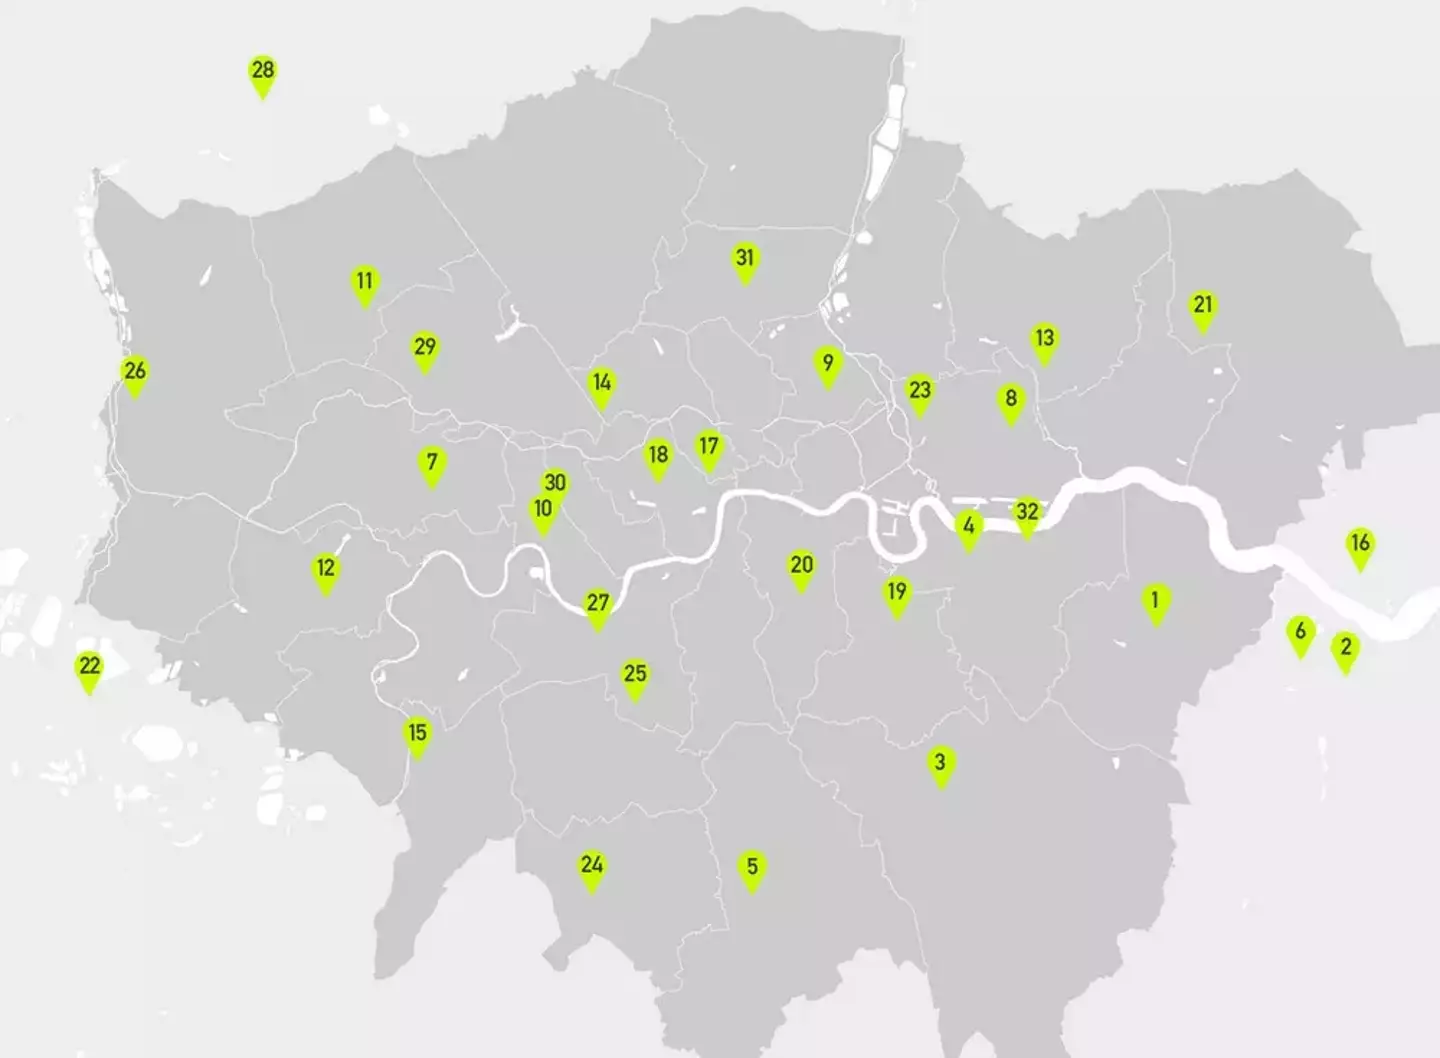 32 new stores have rolled out the click and collect service in London and the surrounding areas.